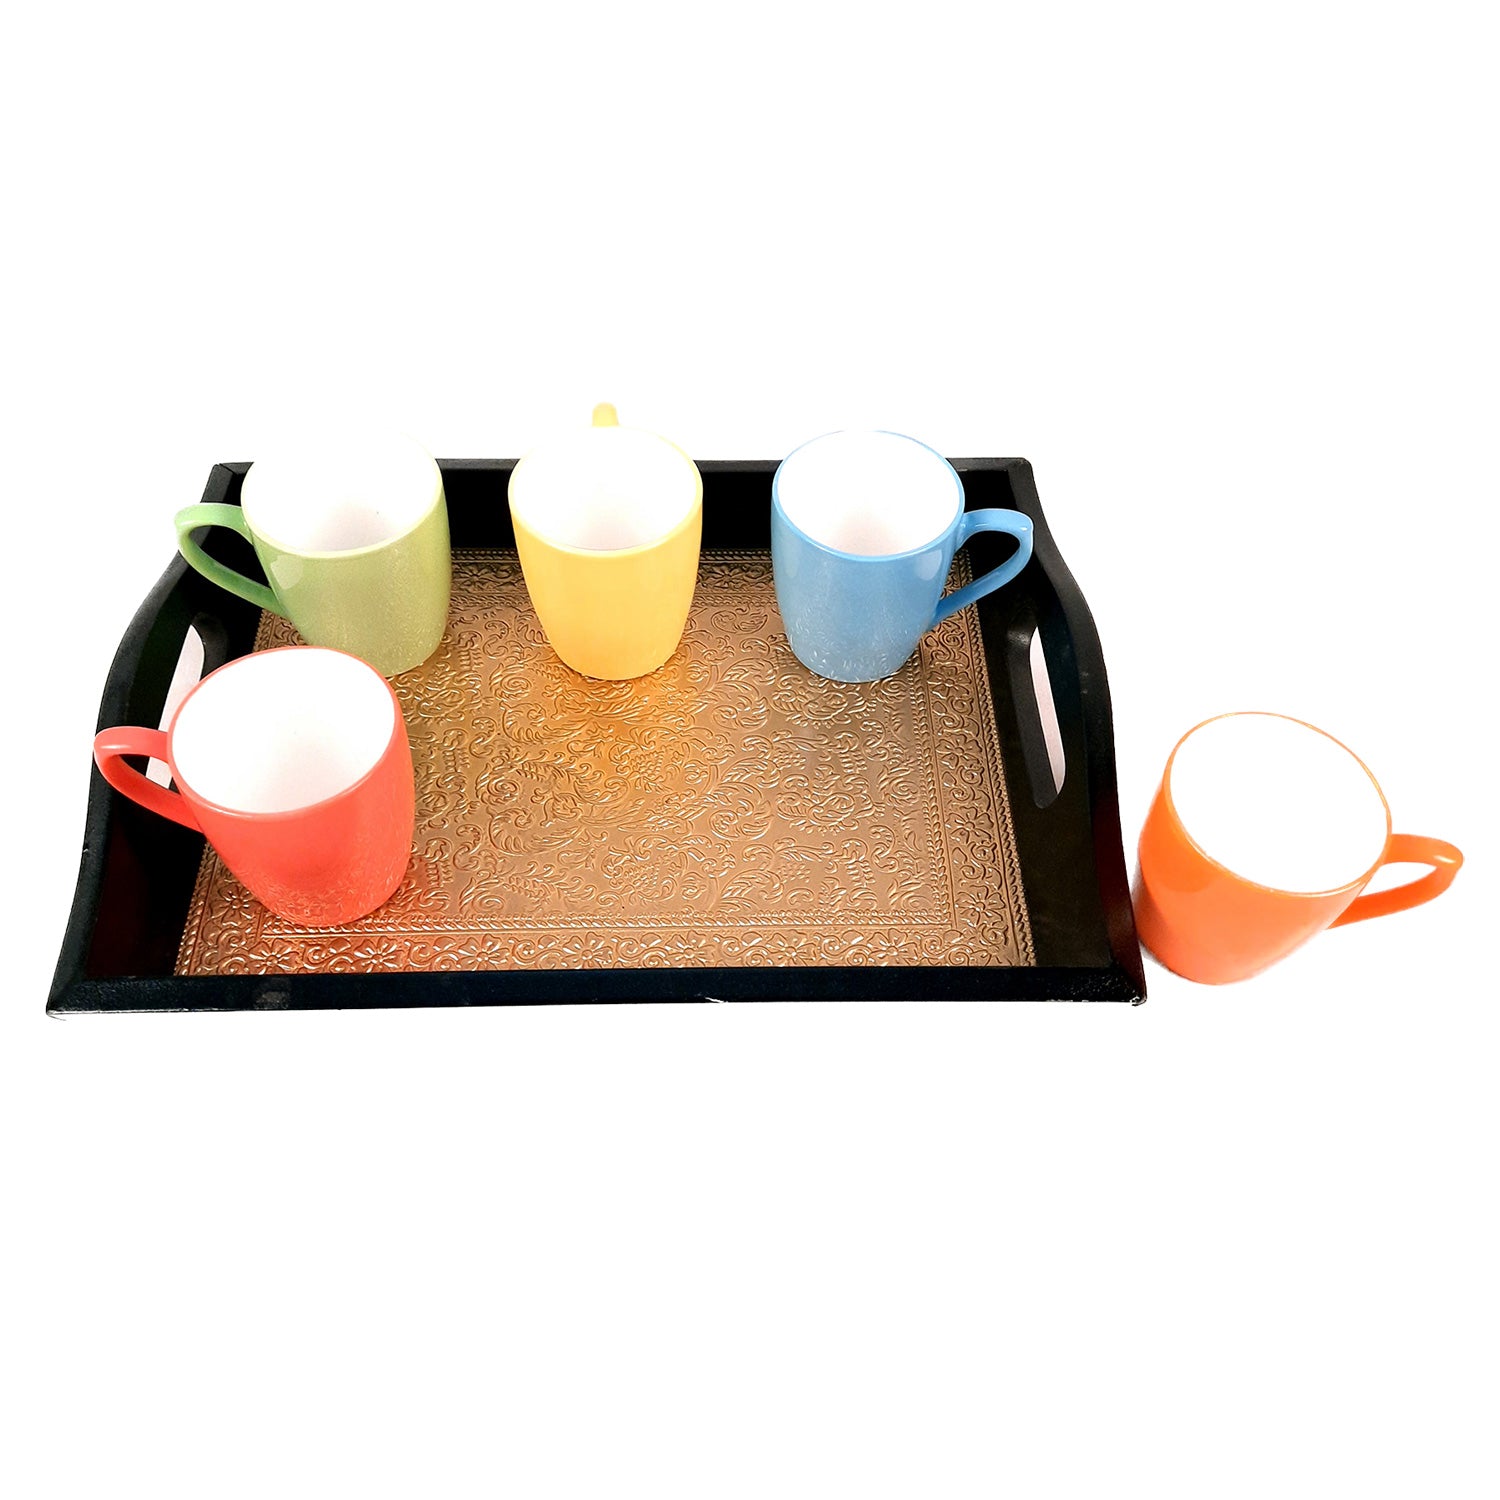 Brass Tray | Wooden Tea & Snacks Serving Platter Wooden | Tray With Handles - for Home, Dining Table, Kitchen Decor, Restaurants, Office, Cafe & Gifts - 14 Inch - Apkamart